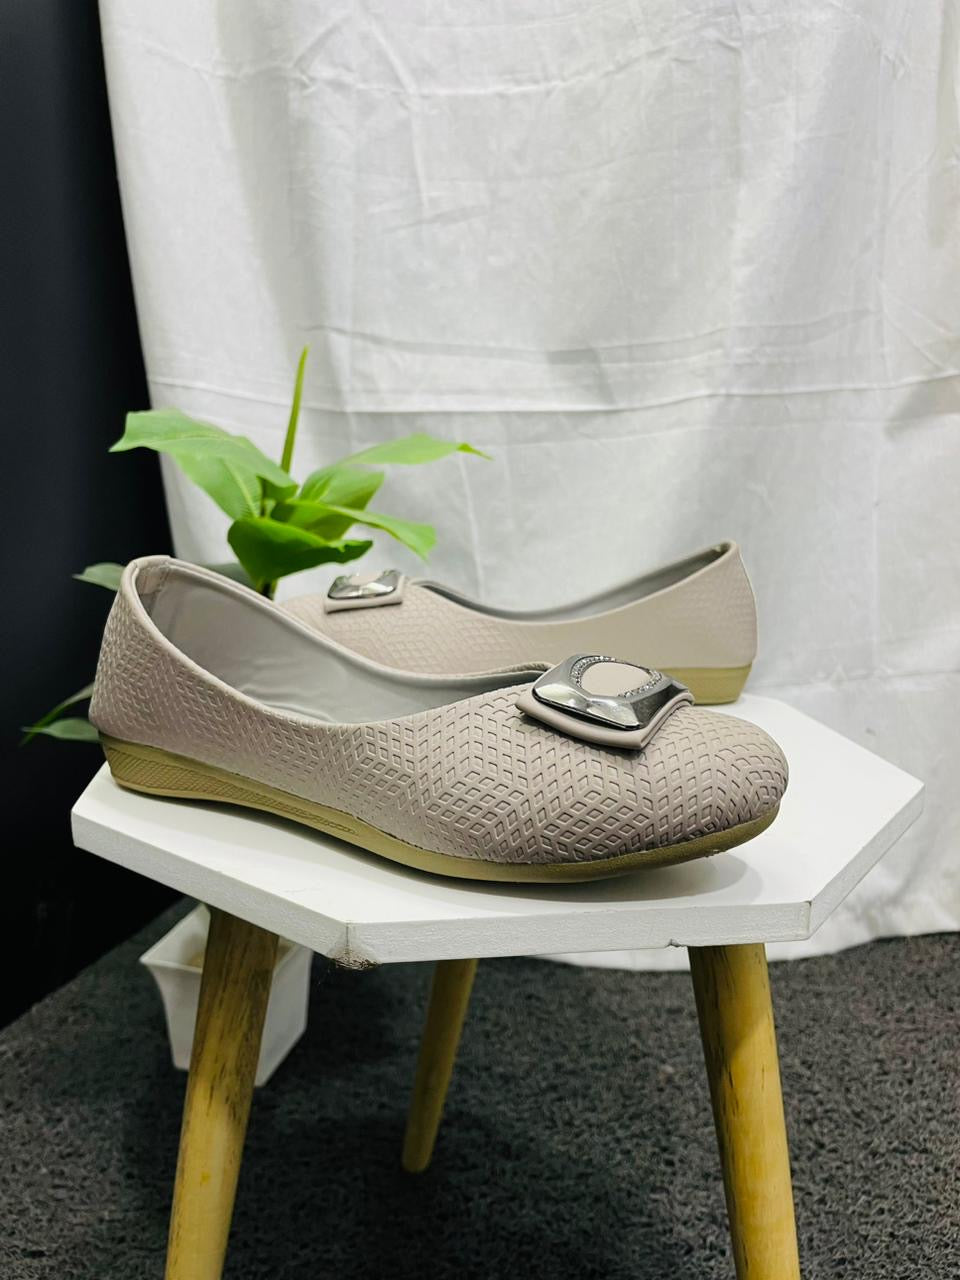 Women's Greyish Buckle Decor Ballet Flats, Fashion Square Toe Soft Sole Slip On Shoes, All-Match Commuter Flats